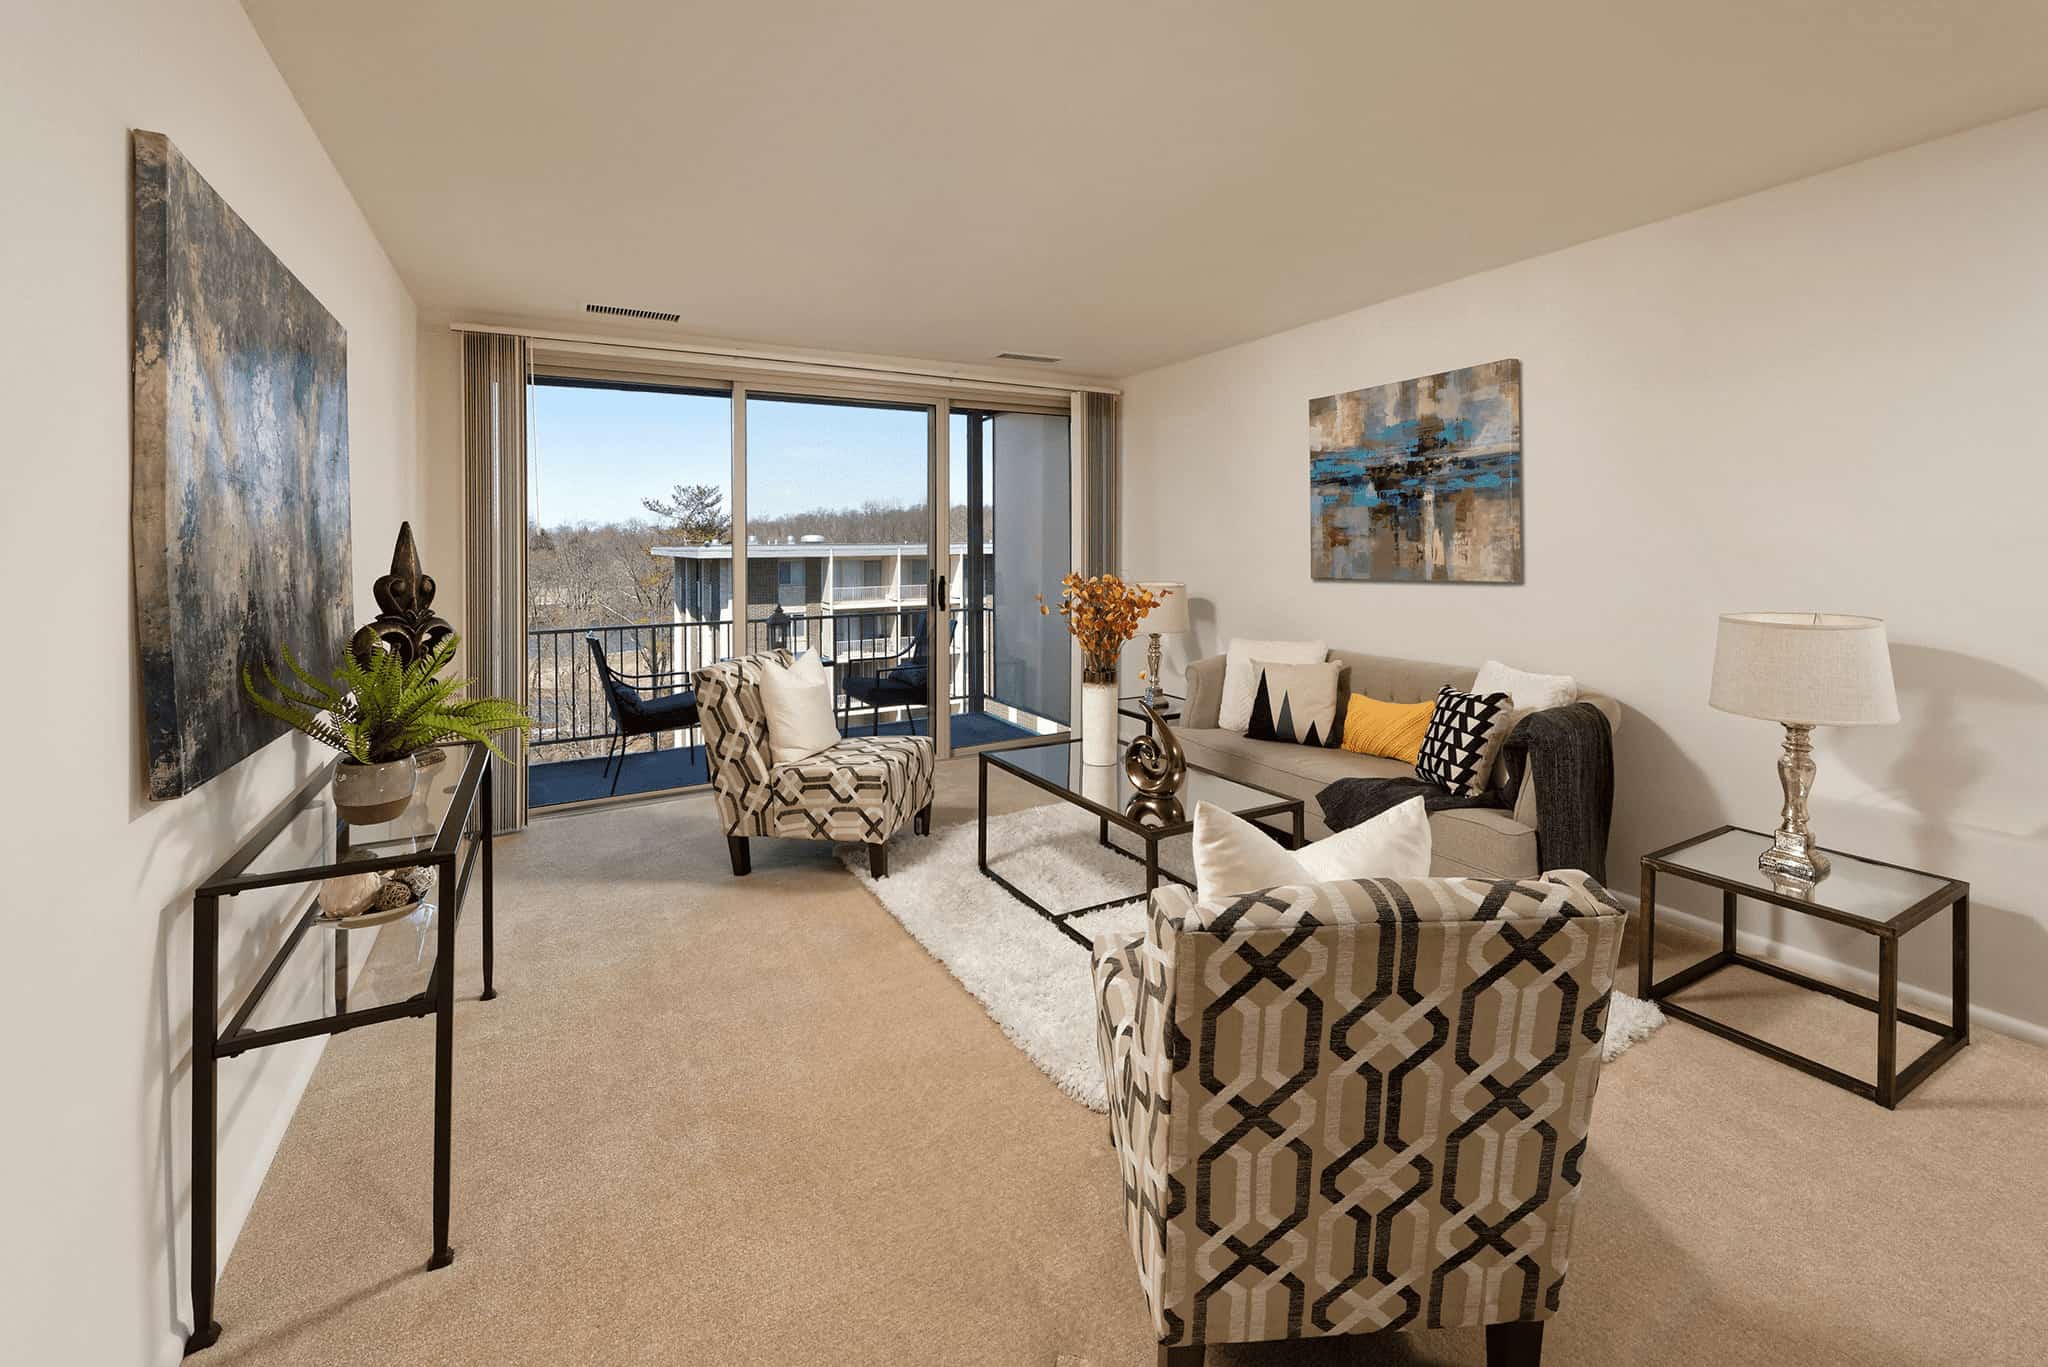 Congressional Towers Apartments living room and balcony